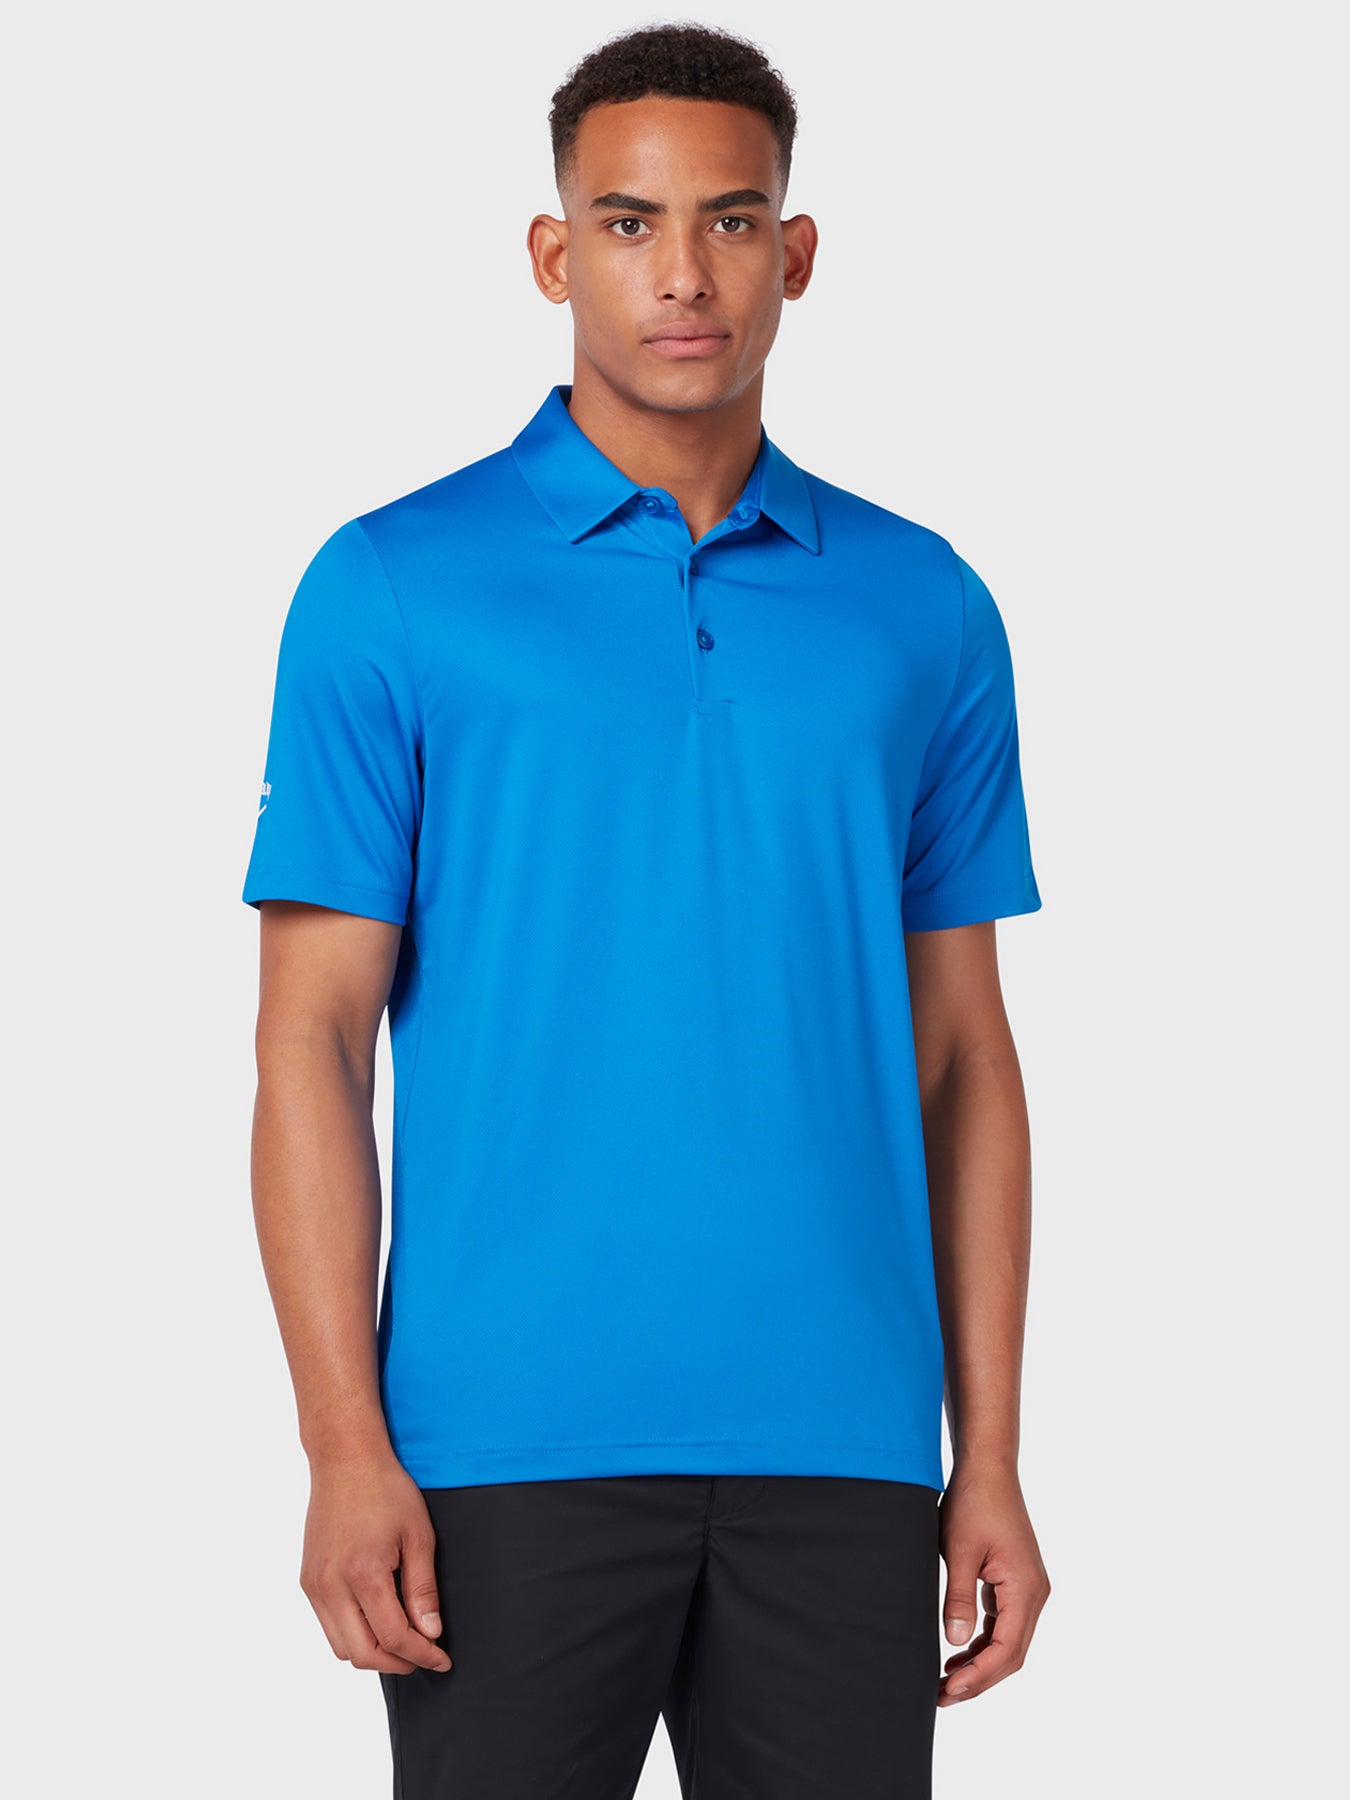 View Swing Tech Tour Polo In Magnetic Blue Magnetic Blue M information